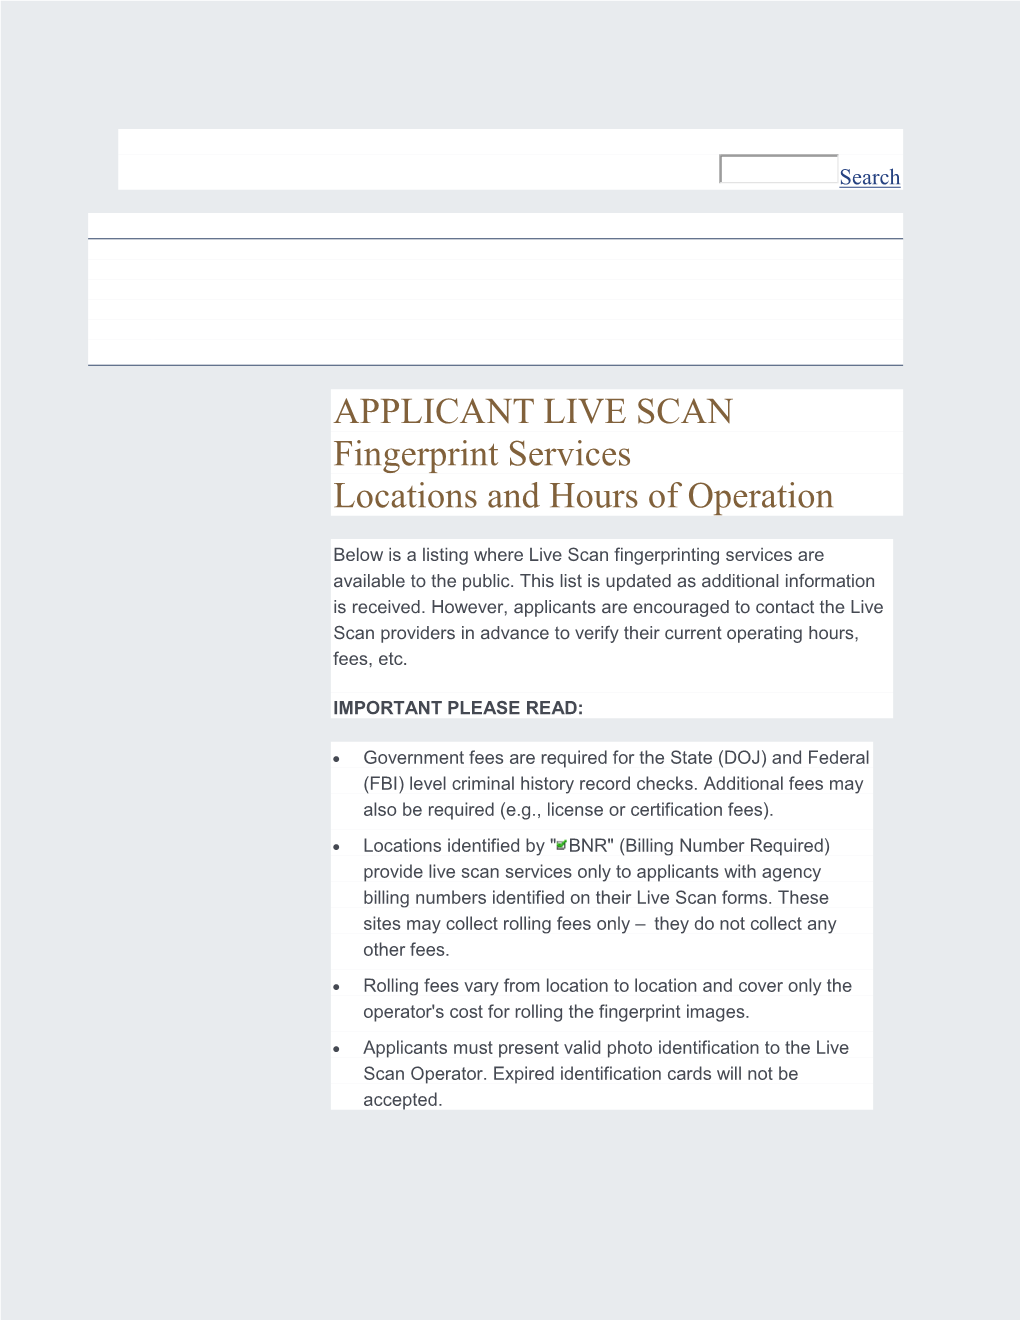 Applicant Live Scan Locations